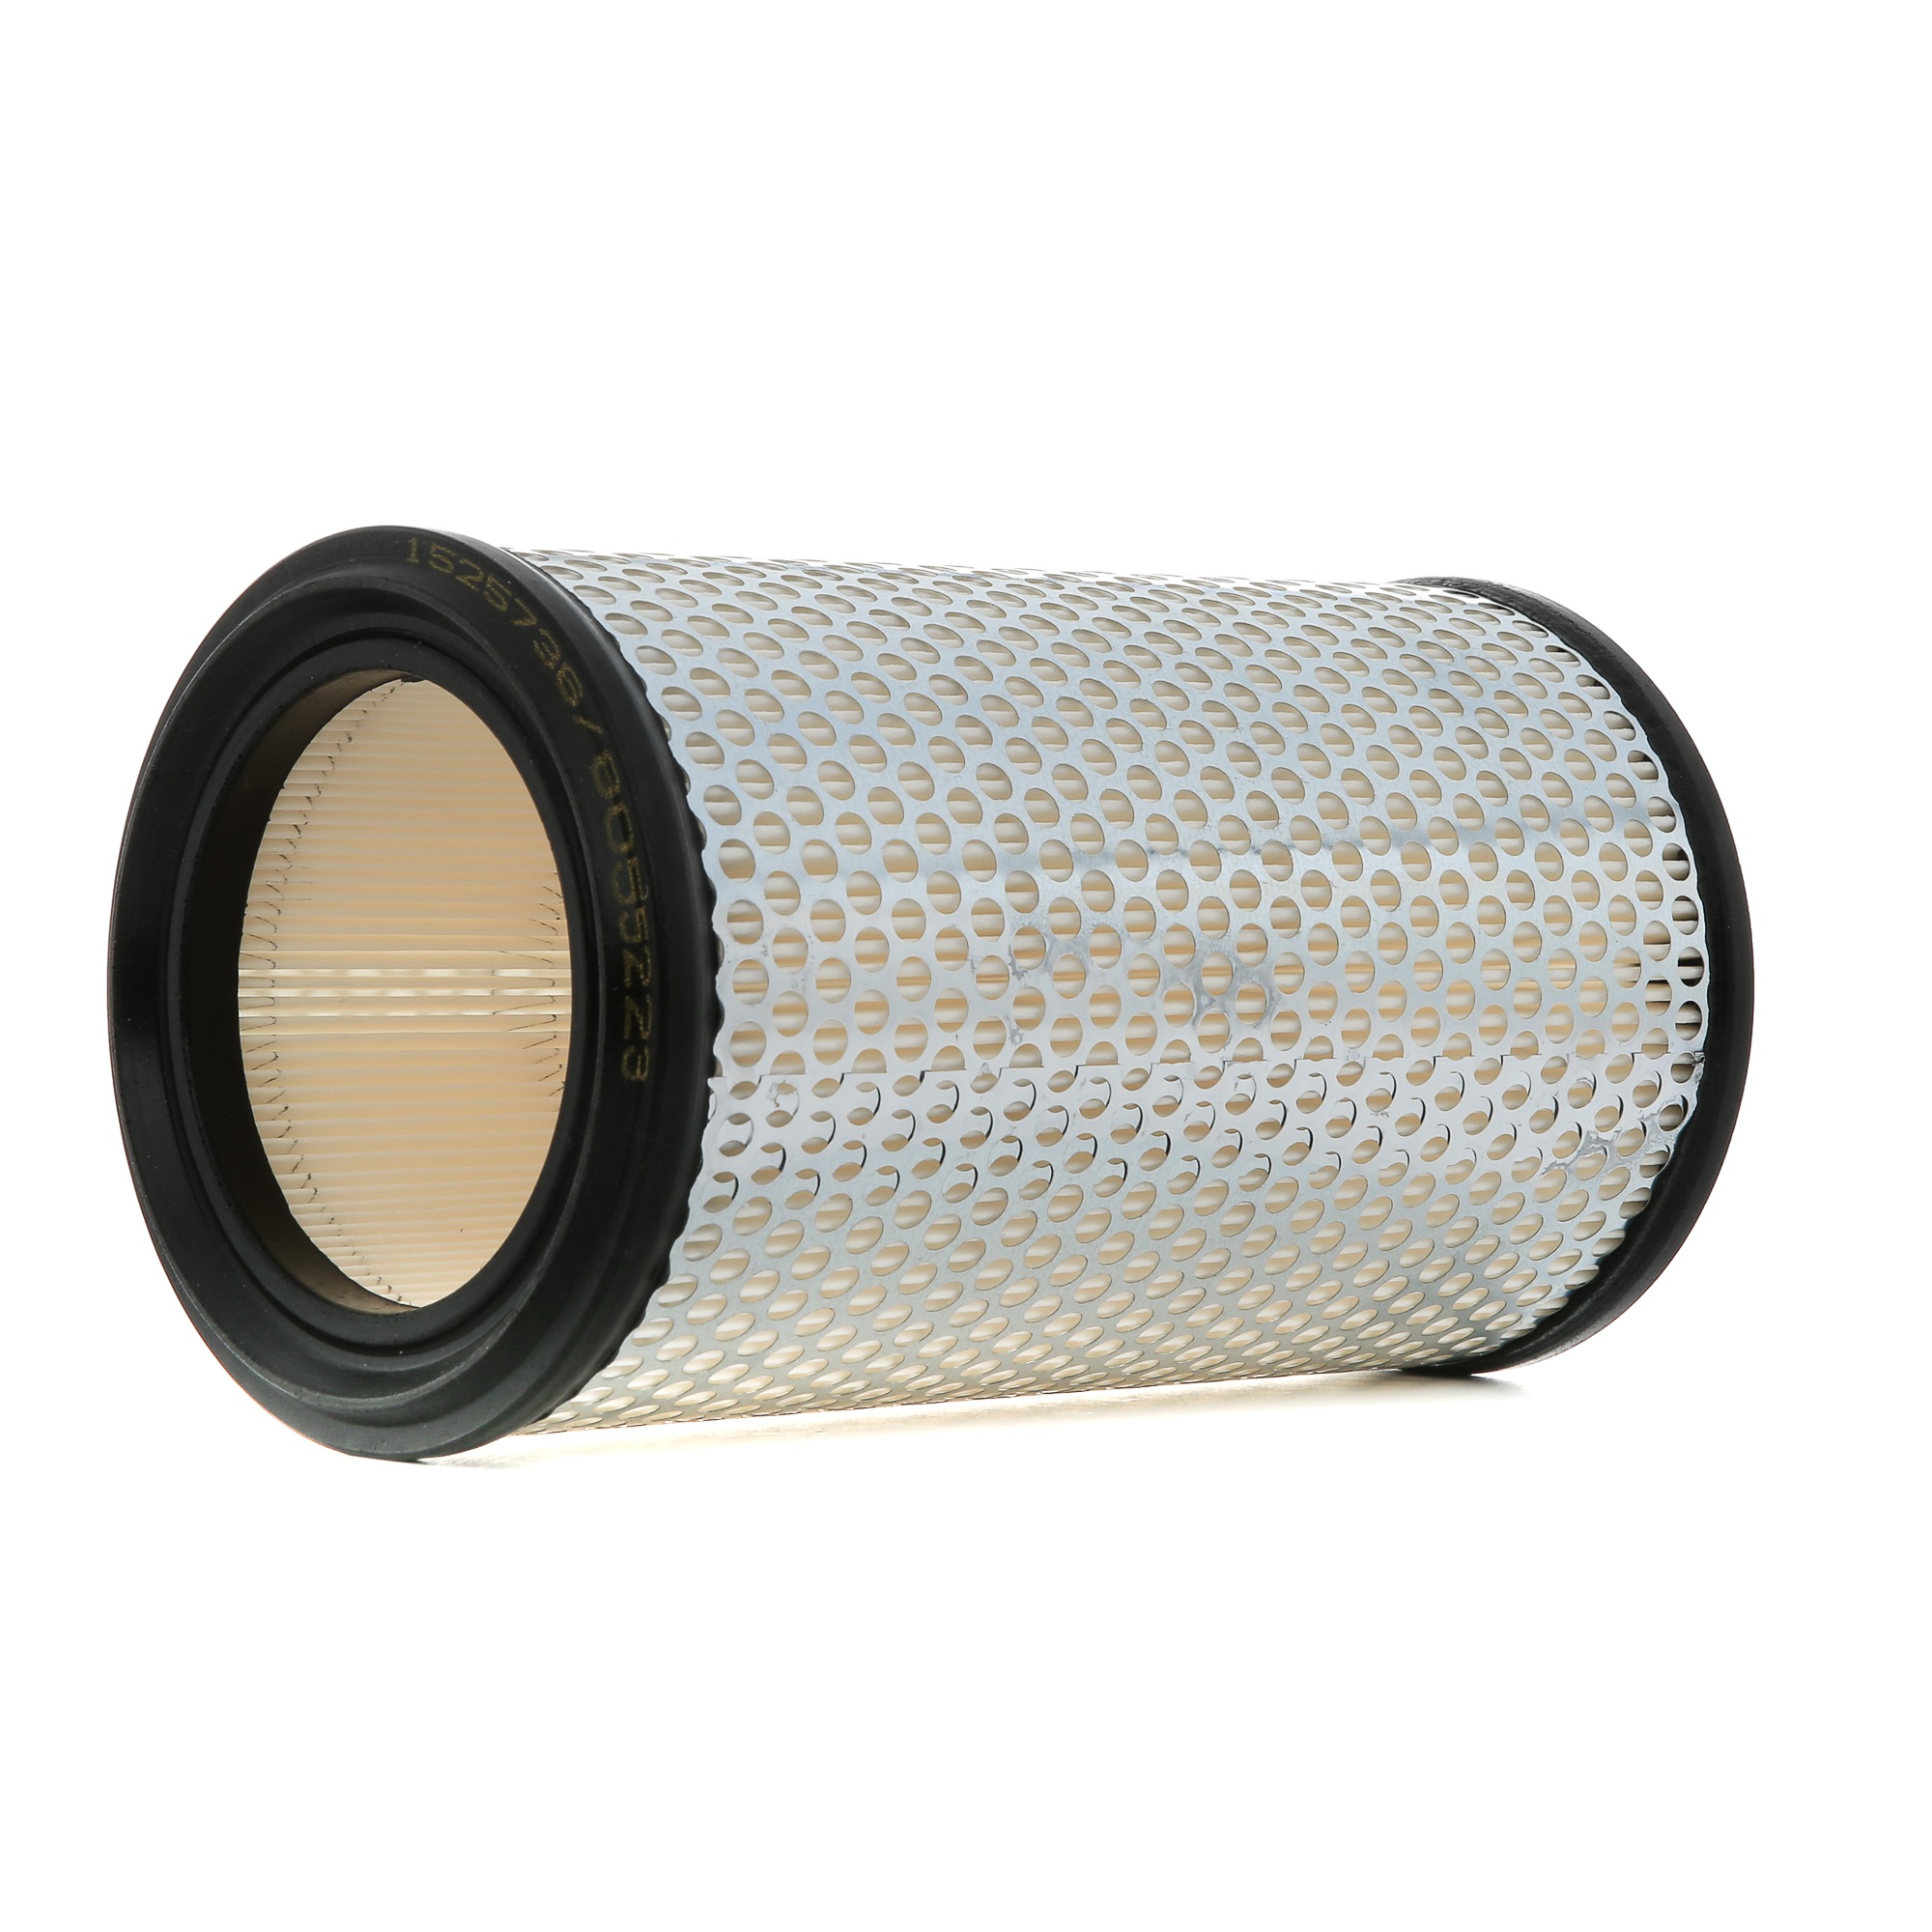 RIDEX 8A0364 Air filter 220mm, 127, 128,5mm, Filter Insert, Centrifuge, with cover mesh